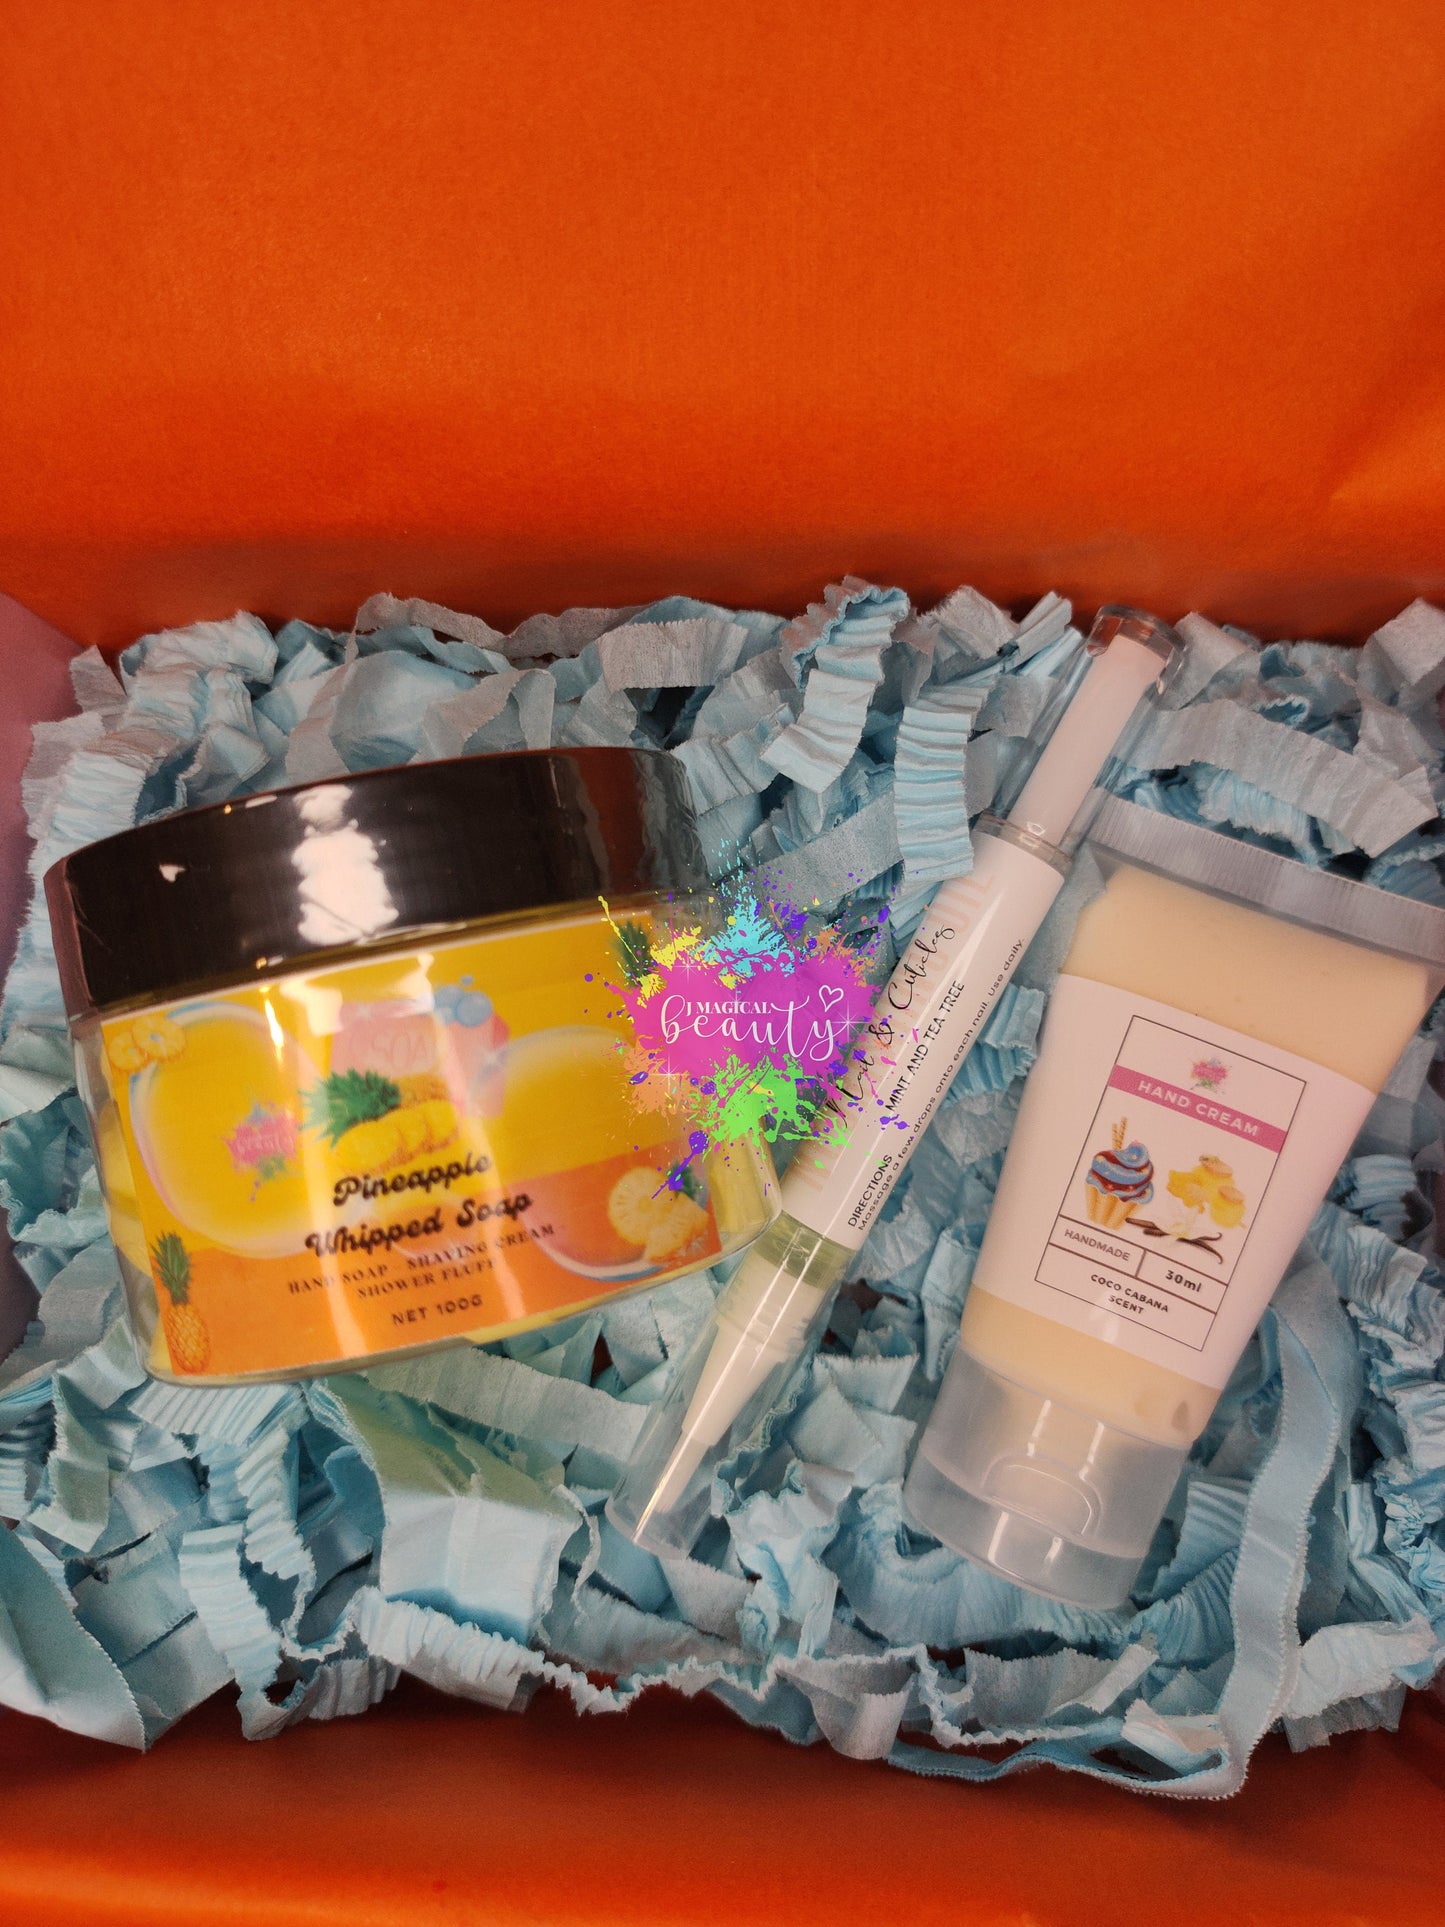 Gift Set/Whipped Soap Pineapple/Cuticle Oil/Hand Cream